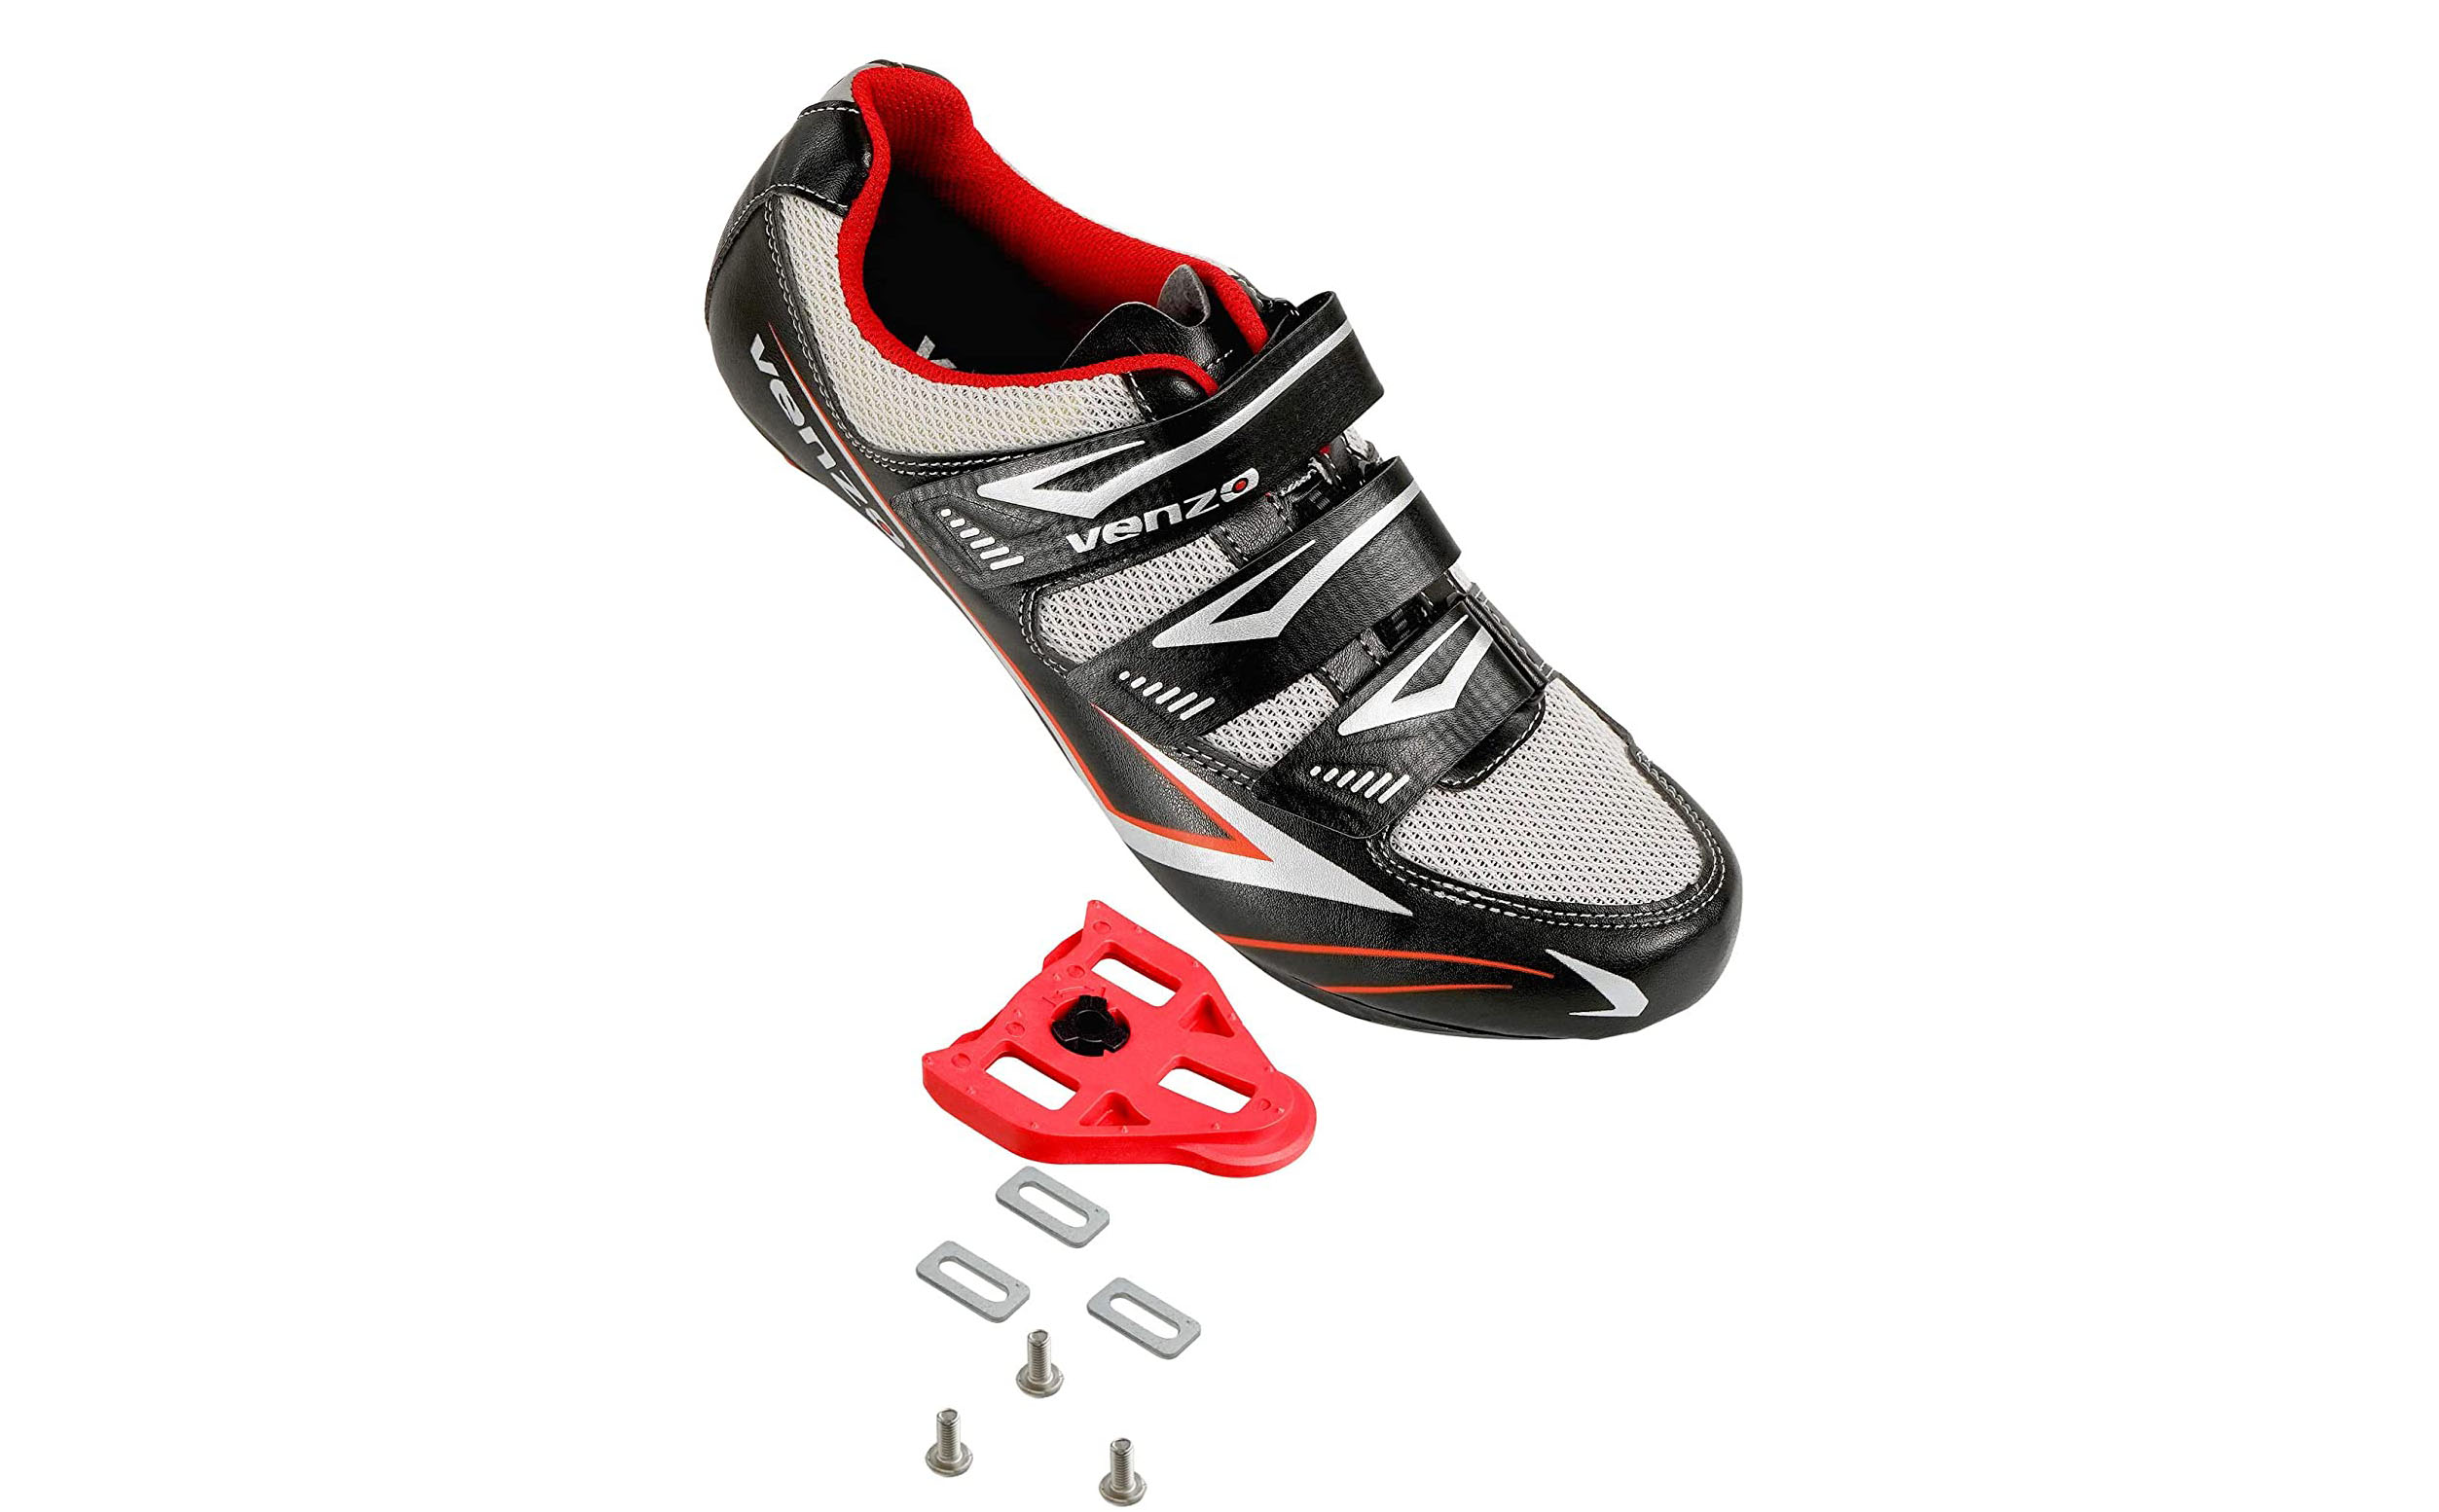 Venzo Bicycle Women's Indoor Cycling Shoes for Peleton